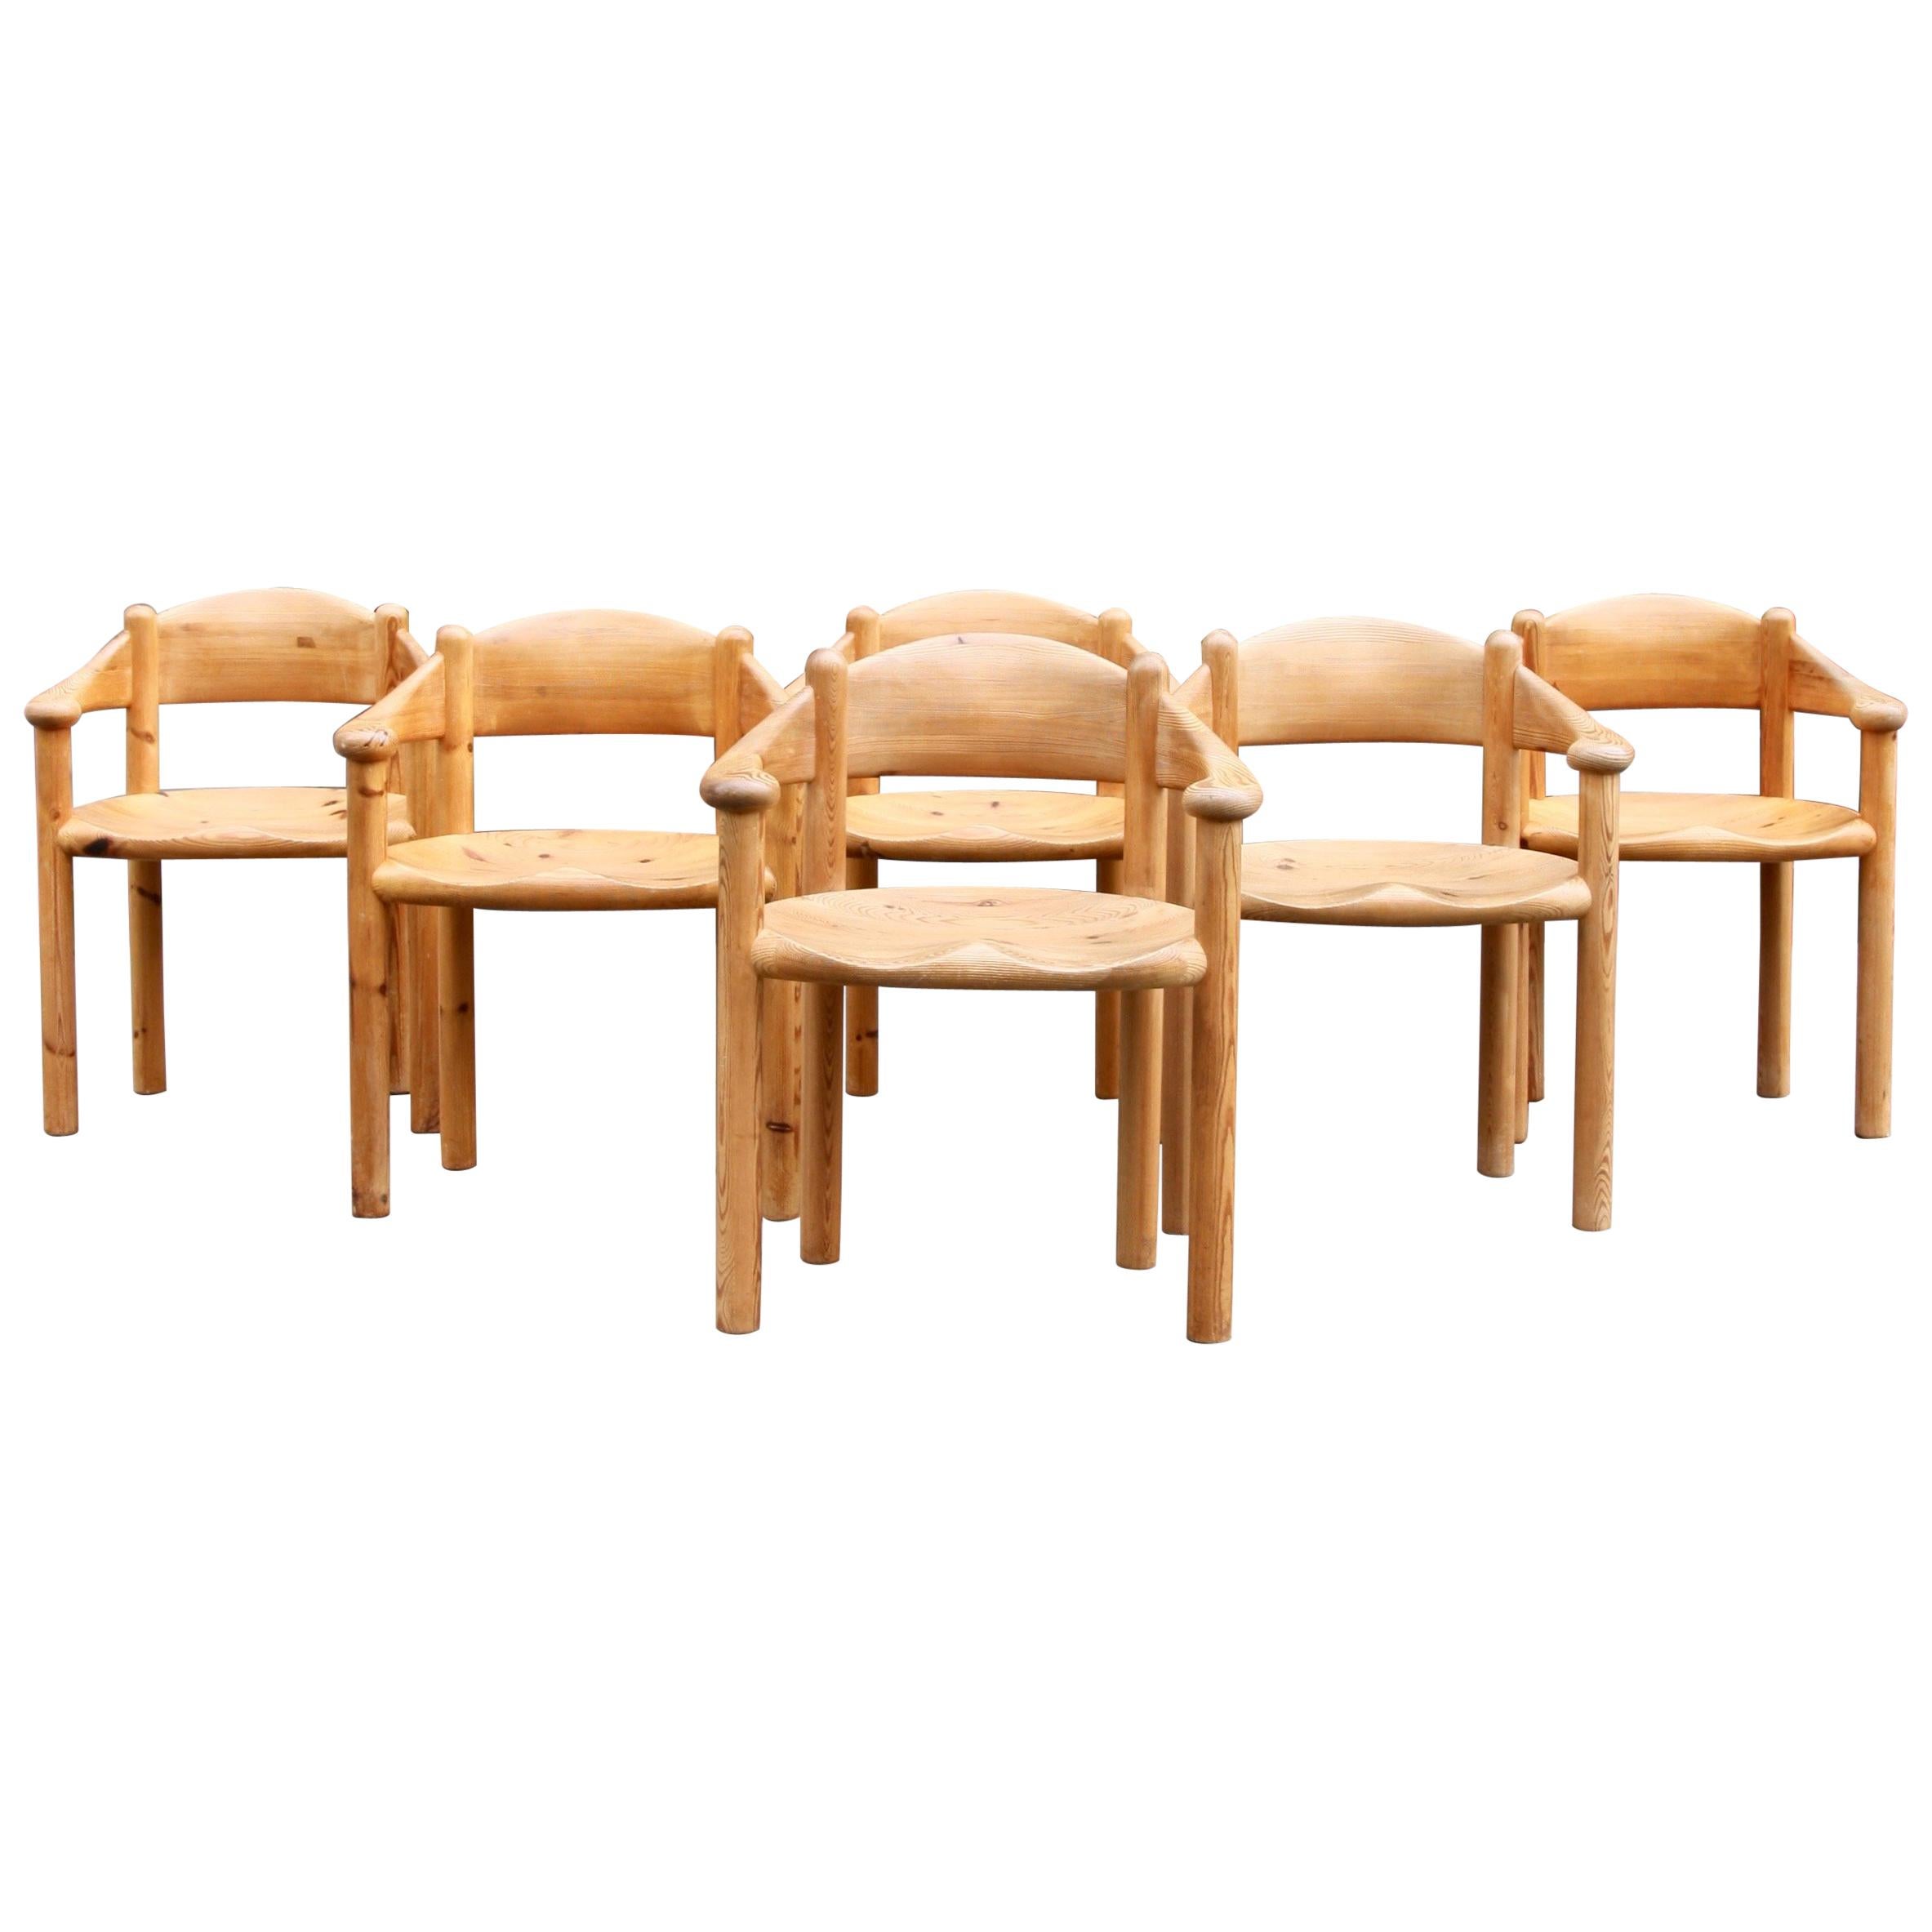 Six 1970s Solid Pine Carver Chairs by Rainer Daumiller for Hirtshals Savværk